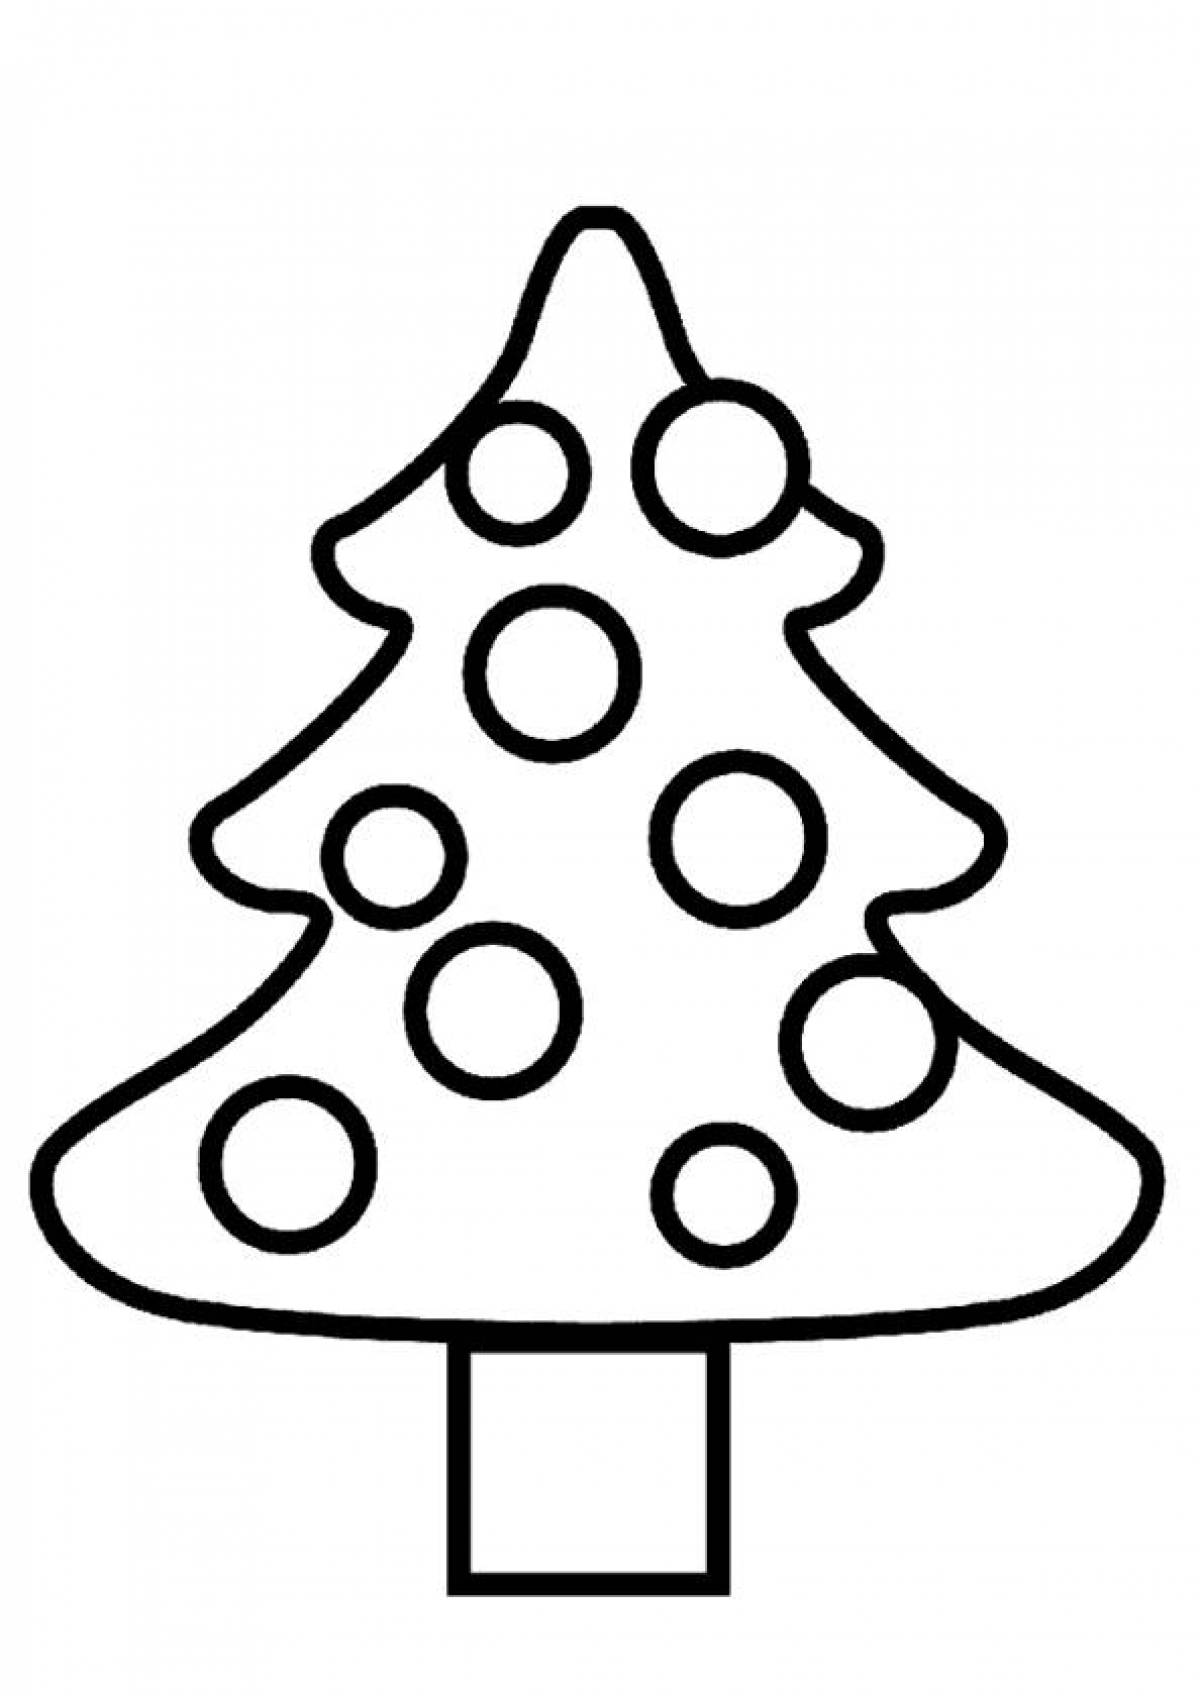 Fancy Christmas tree coloring book for 2-3 year olds